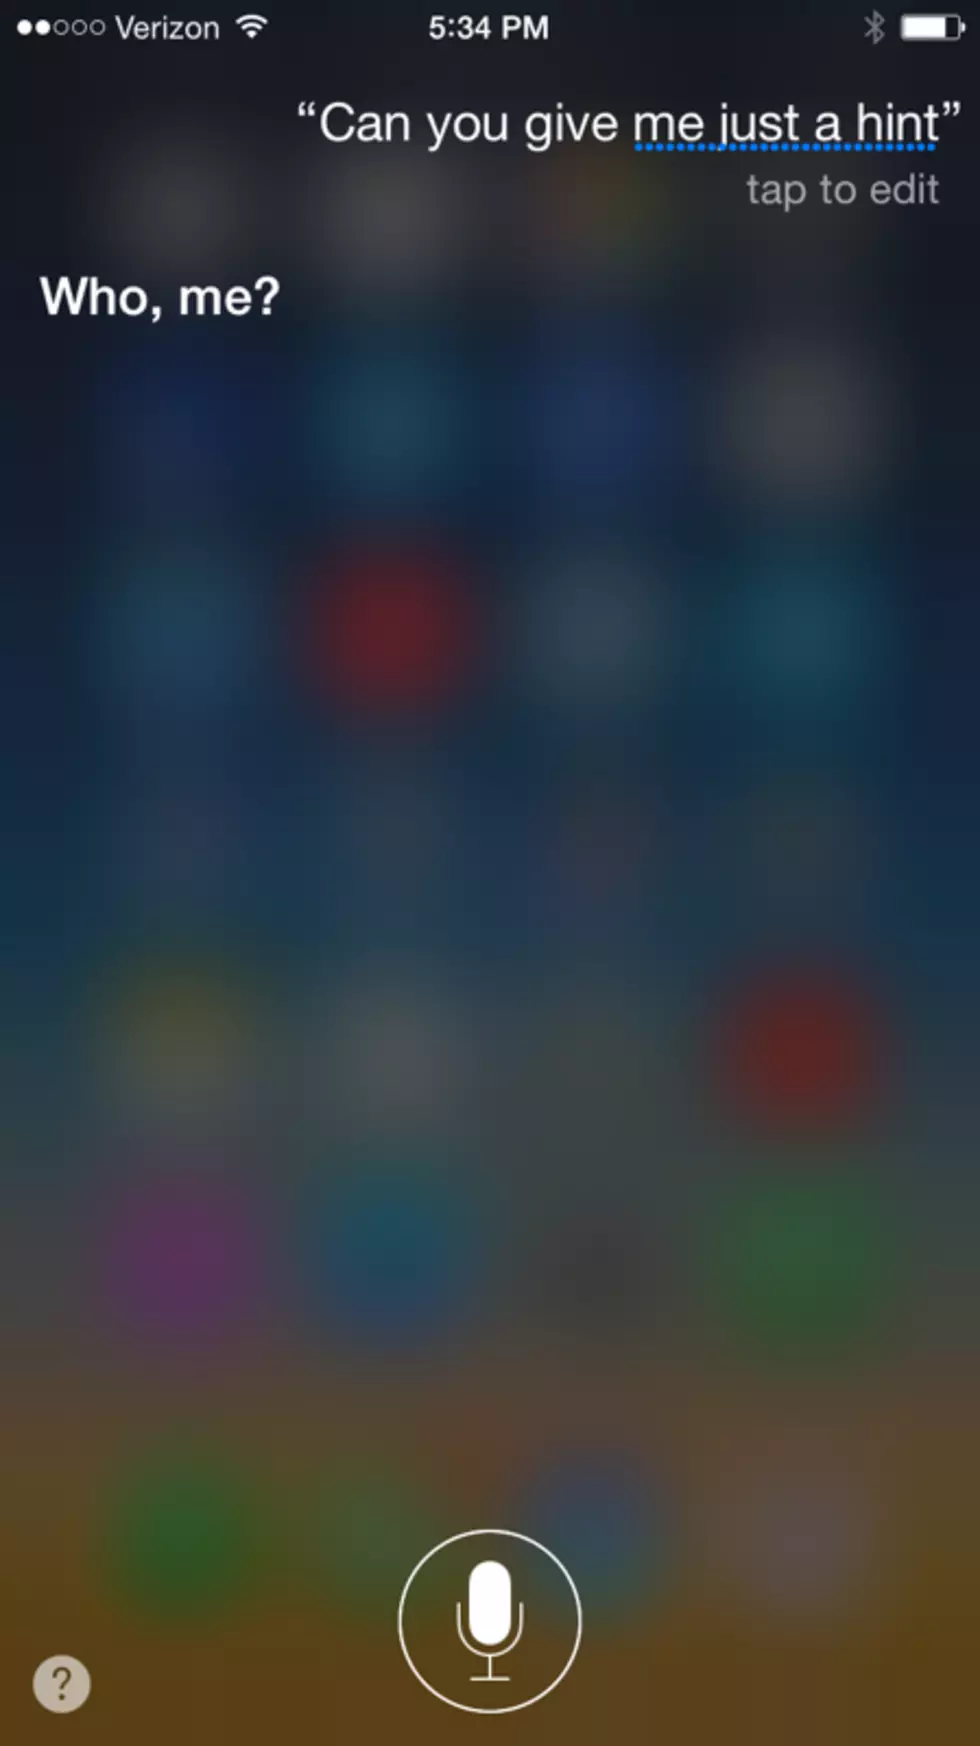 Here’s What Happens When You Ask Siri About the New iPhone [PHOTOS]